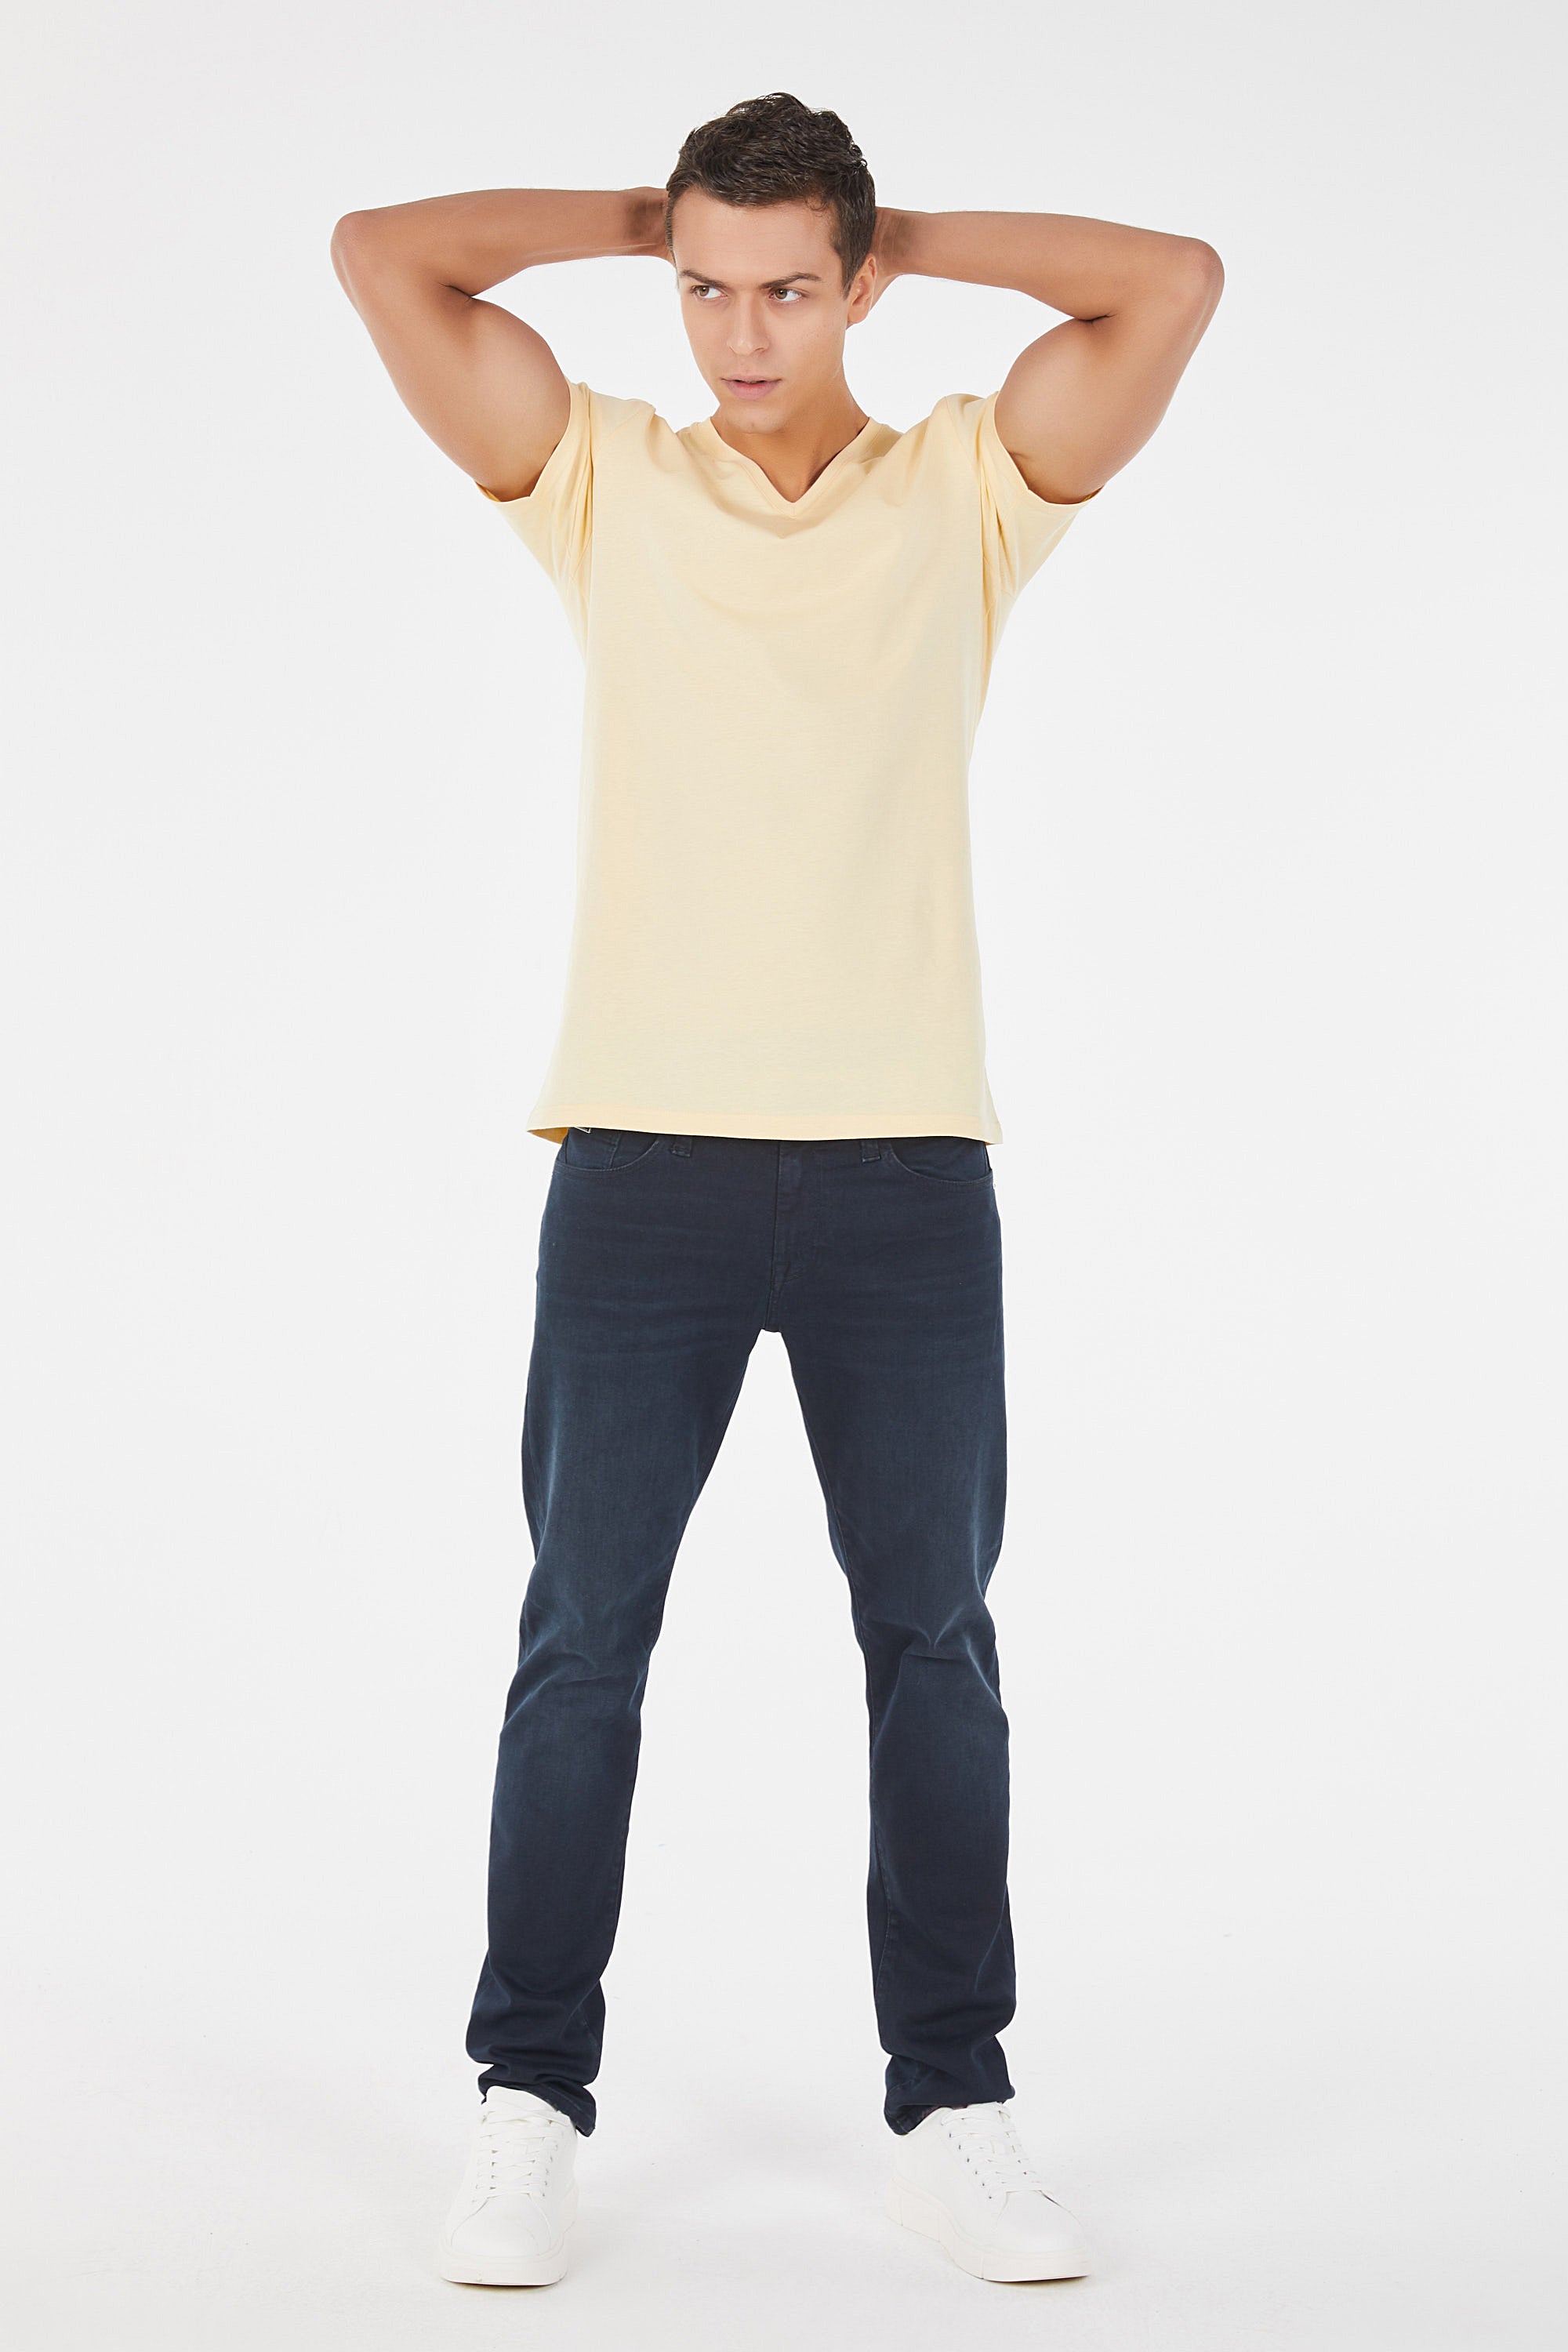 Ajax Faded Yellow T-Shirt For Man | Vary Fits